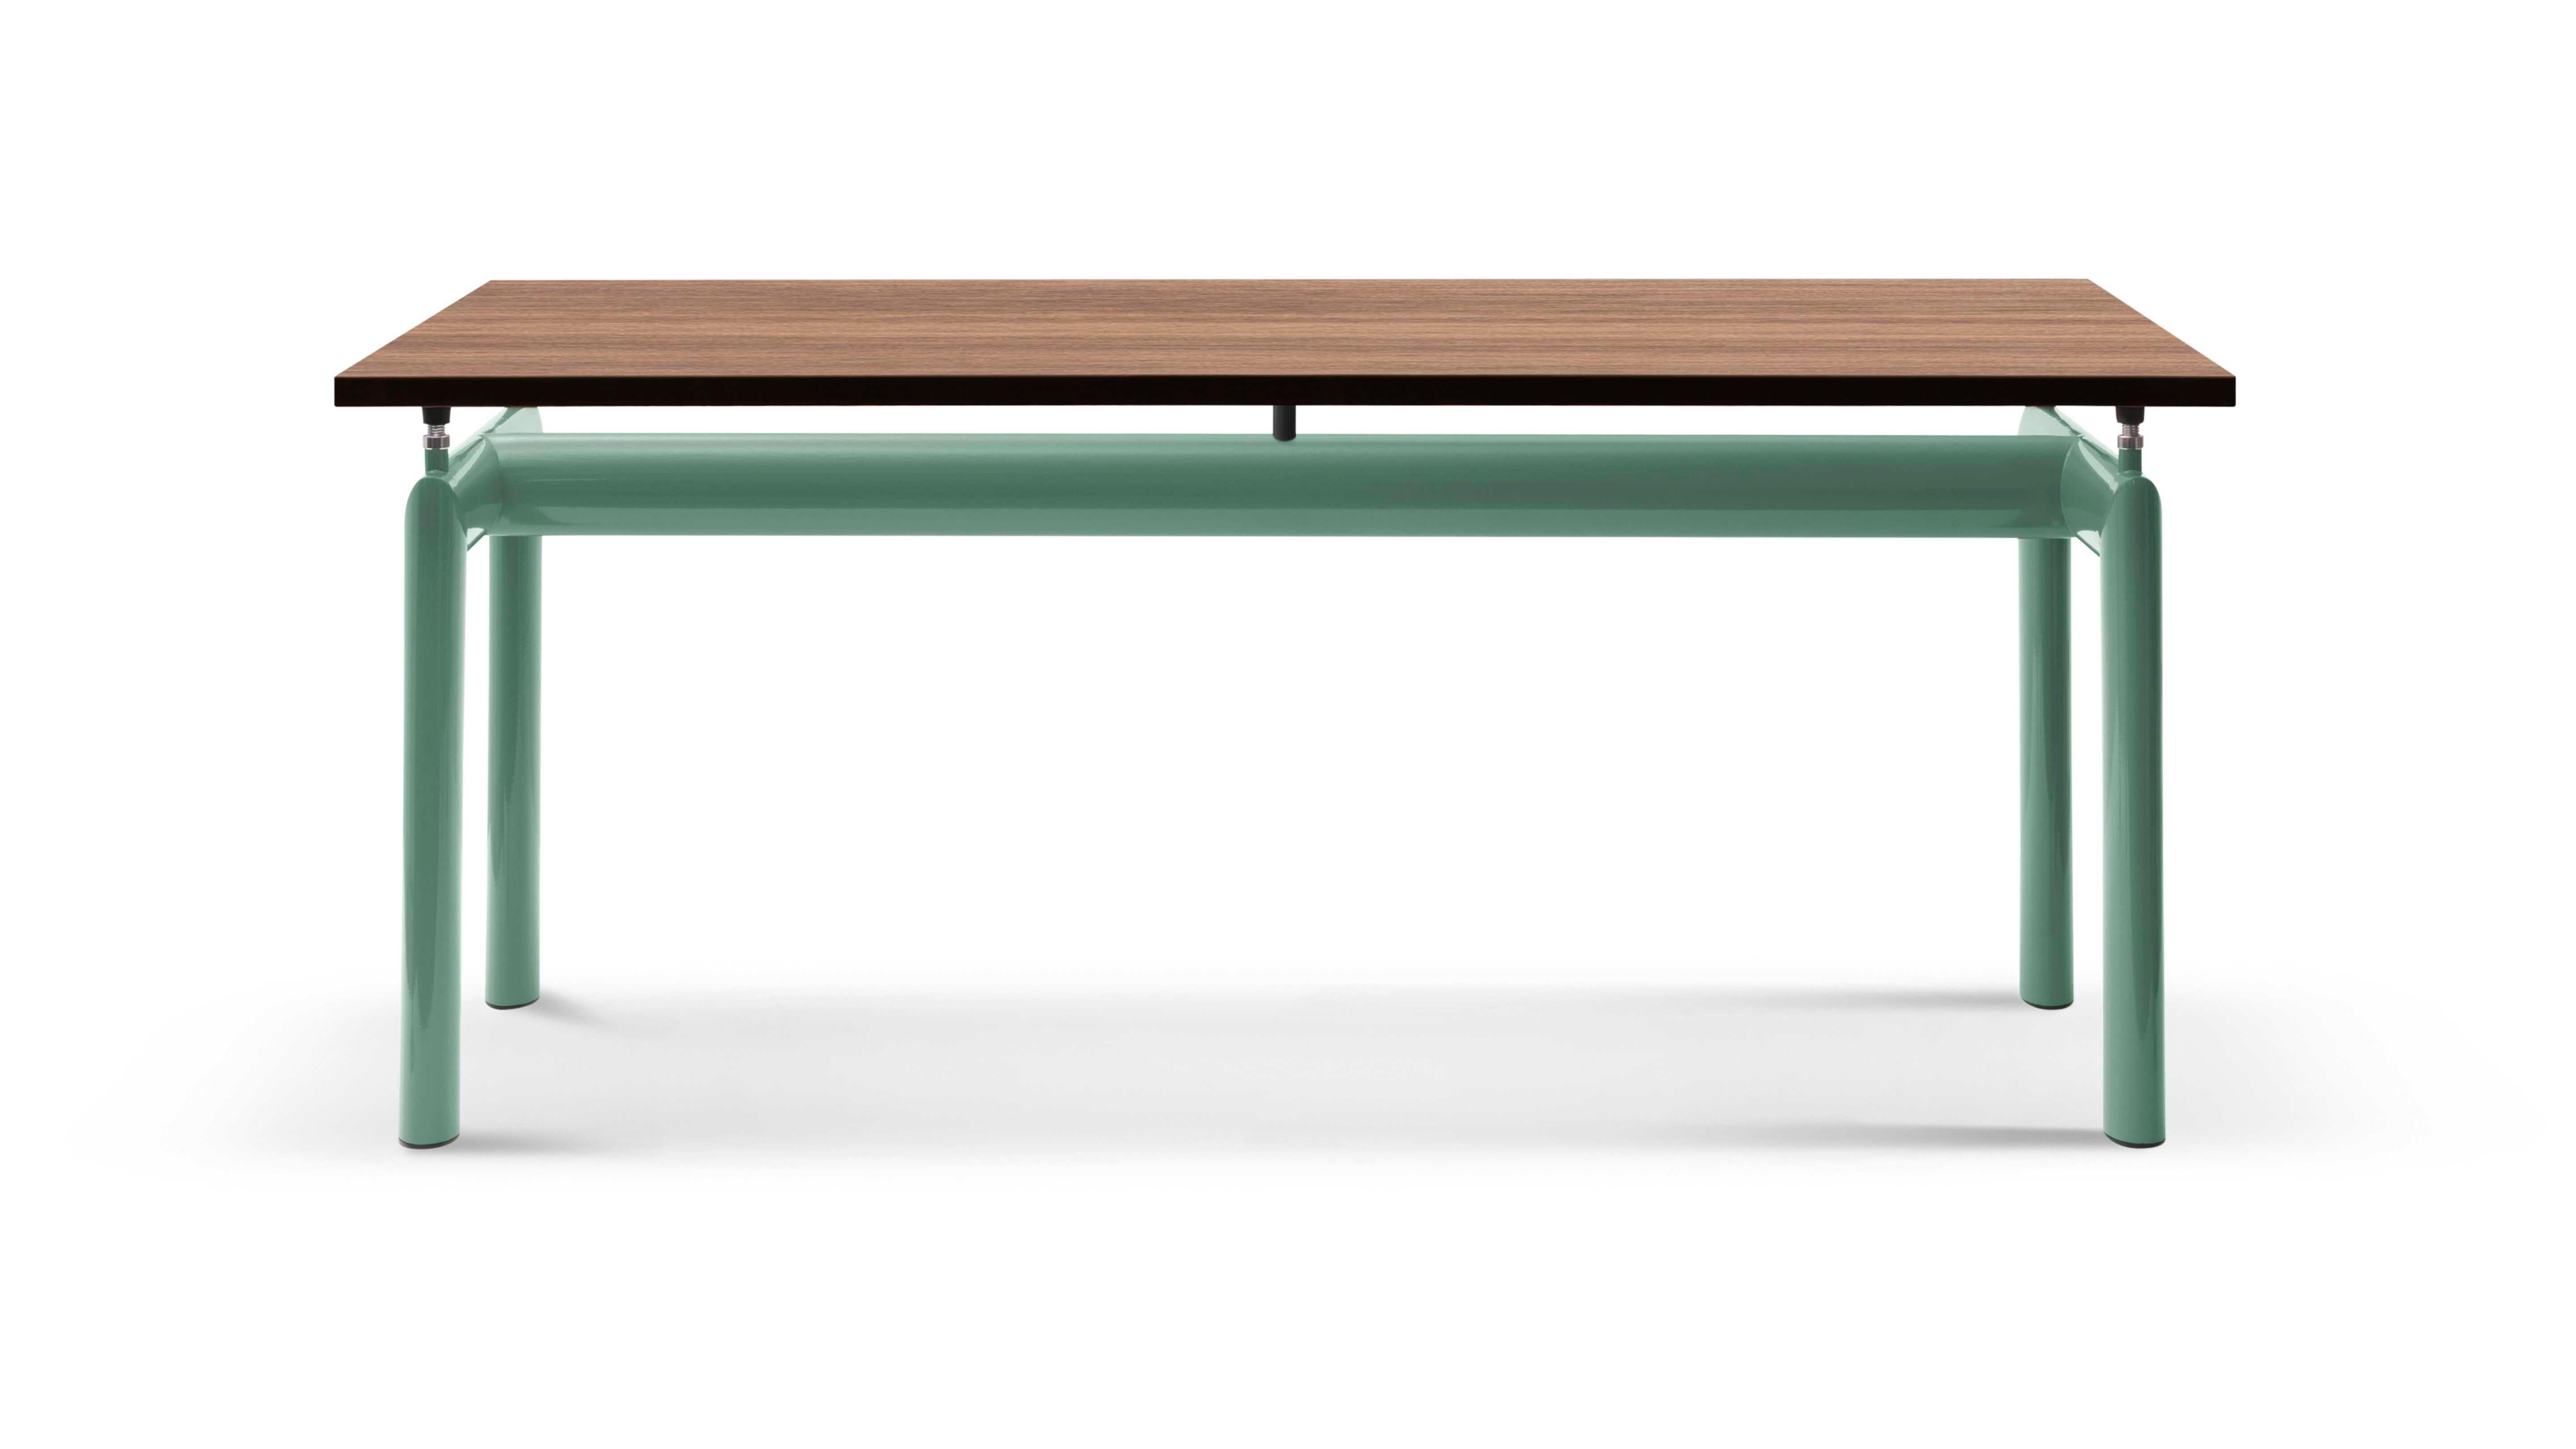 Price is dependent on the chosen size and material of the table - please get in touch for details. Expression of the lengthy research conducted by Cassina on the masterpieces of the great masters, the Table tube d’avion design table is one of the